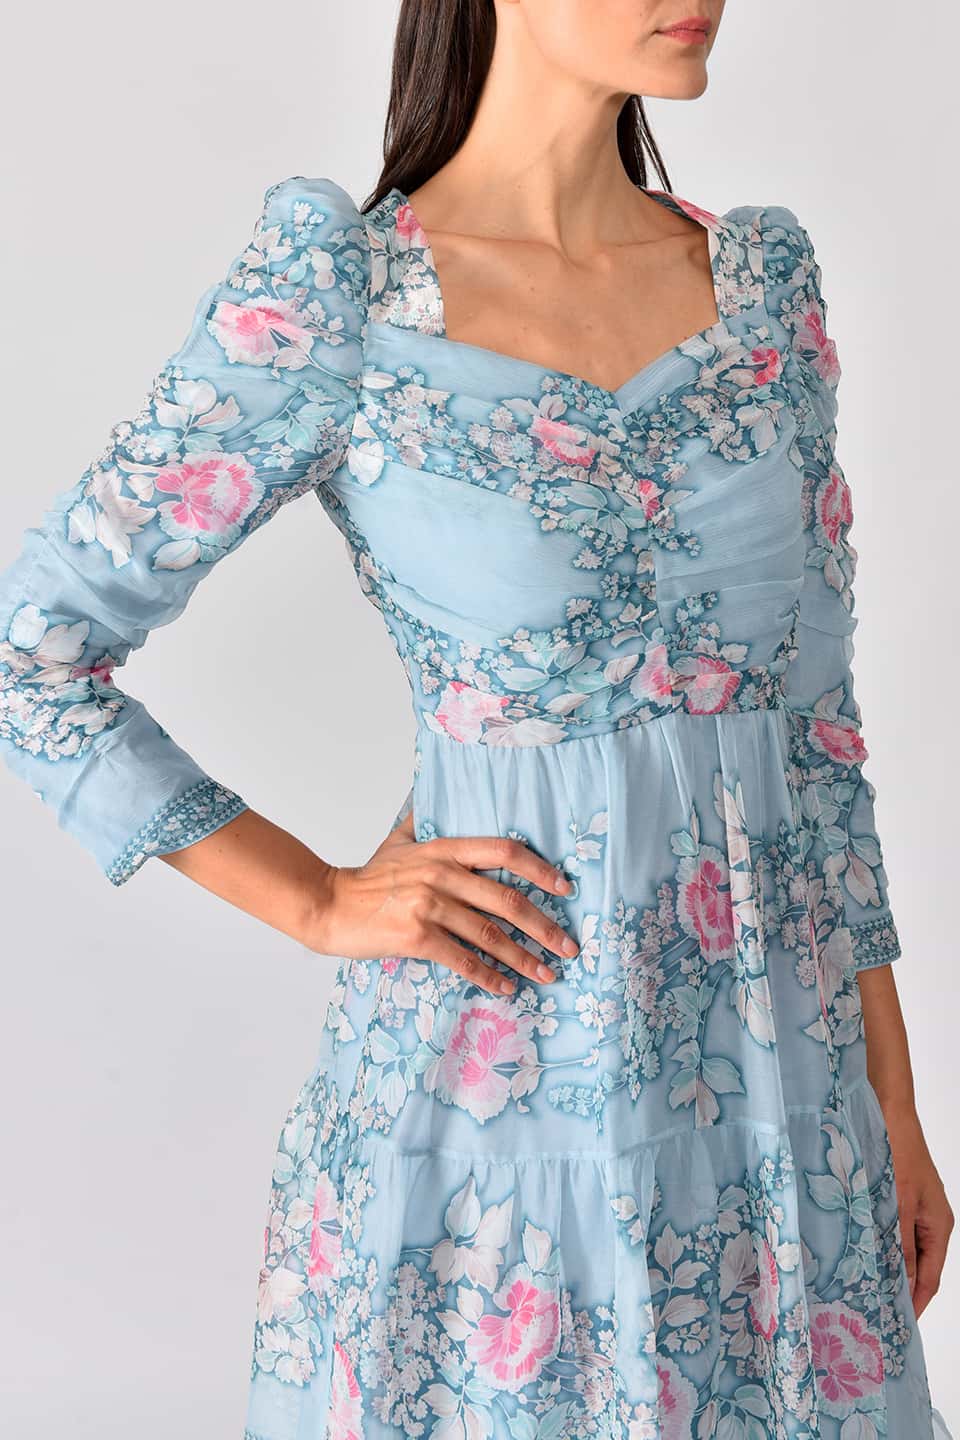 Thumbnail for Product gallery 7, Model wearing floral print silk chiffon tiered long dress in a pale blue color from stylist Vilshenho, in pose